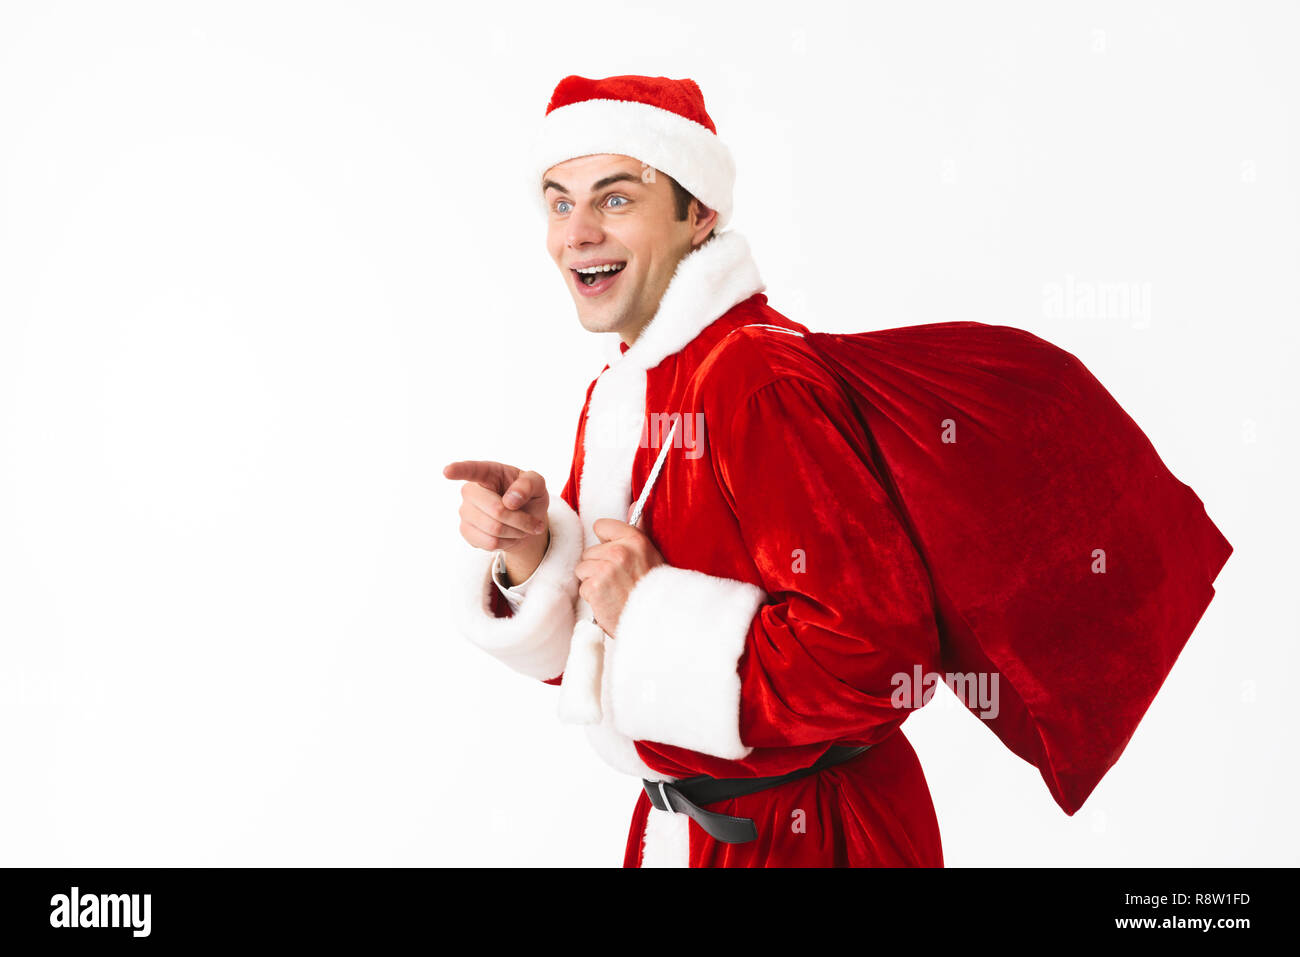 Portrait of joyous man 30s in santa claus costume and red hat walking with gift bag over shoulder isolated on white background in studio Stock Photo